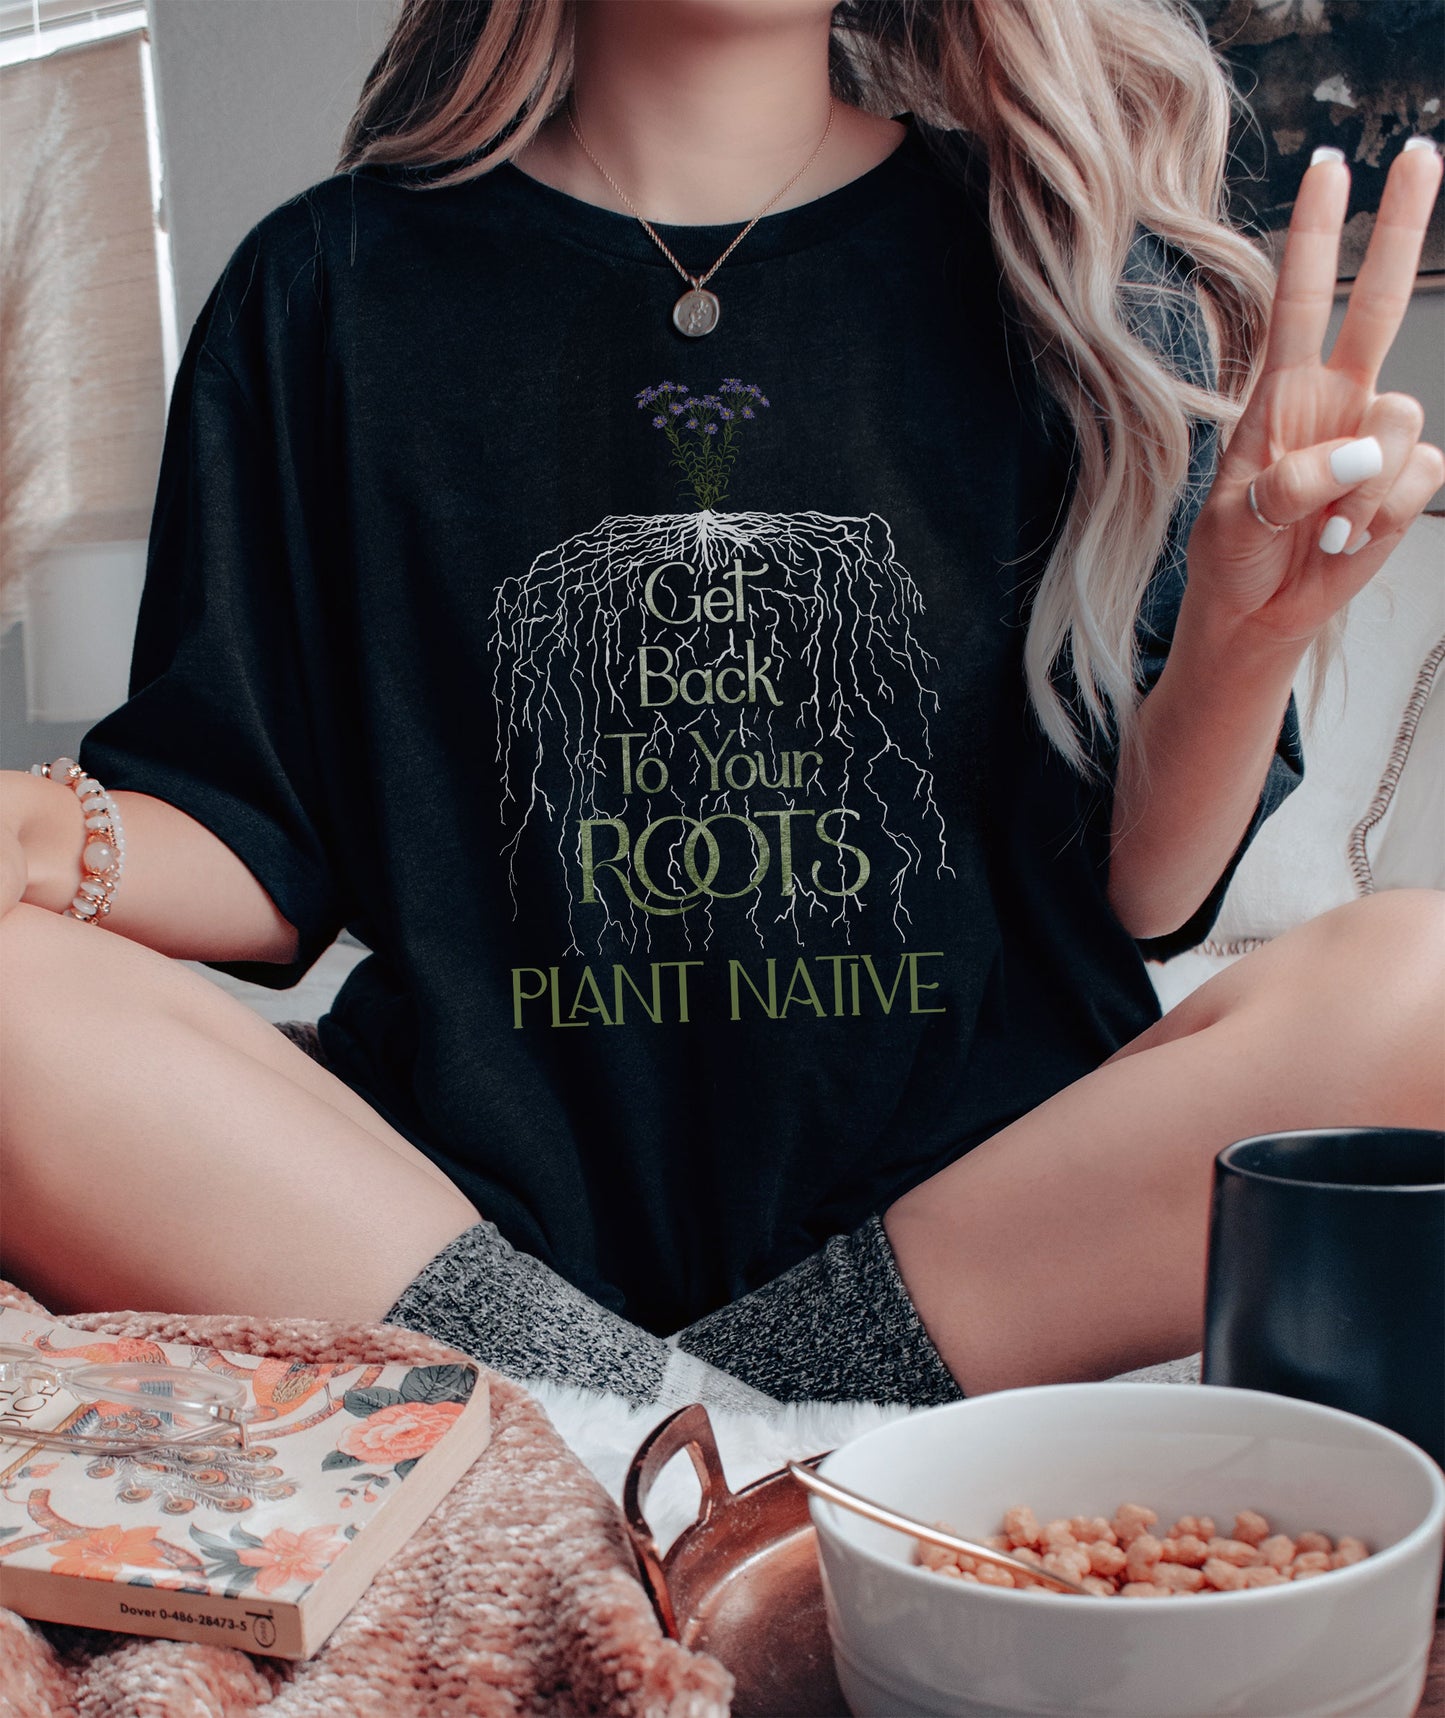 Plant Native, Get Back to Your Roots tee, Nature t-shirt for conservation, Environmental science gift for ecological teachers & gardeners.